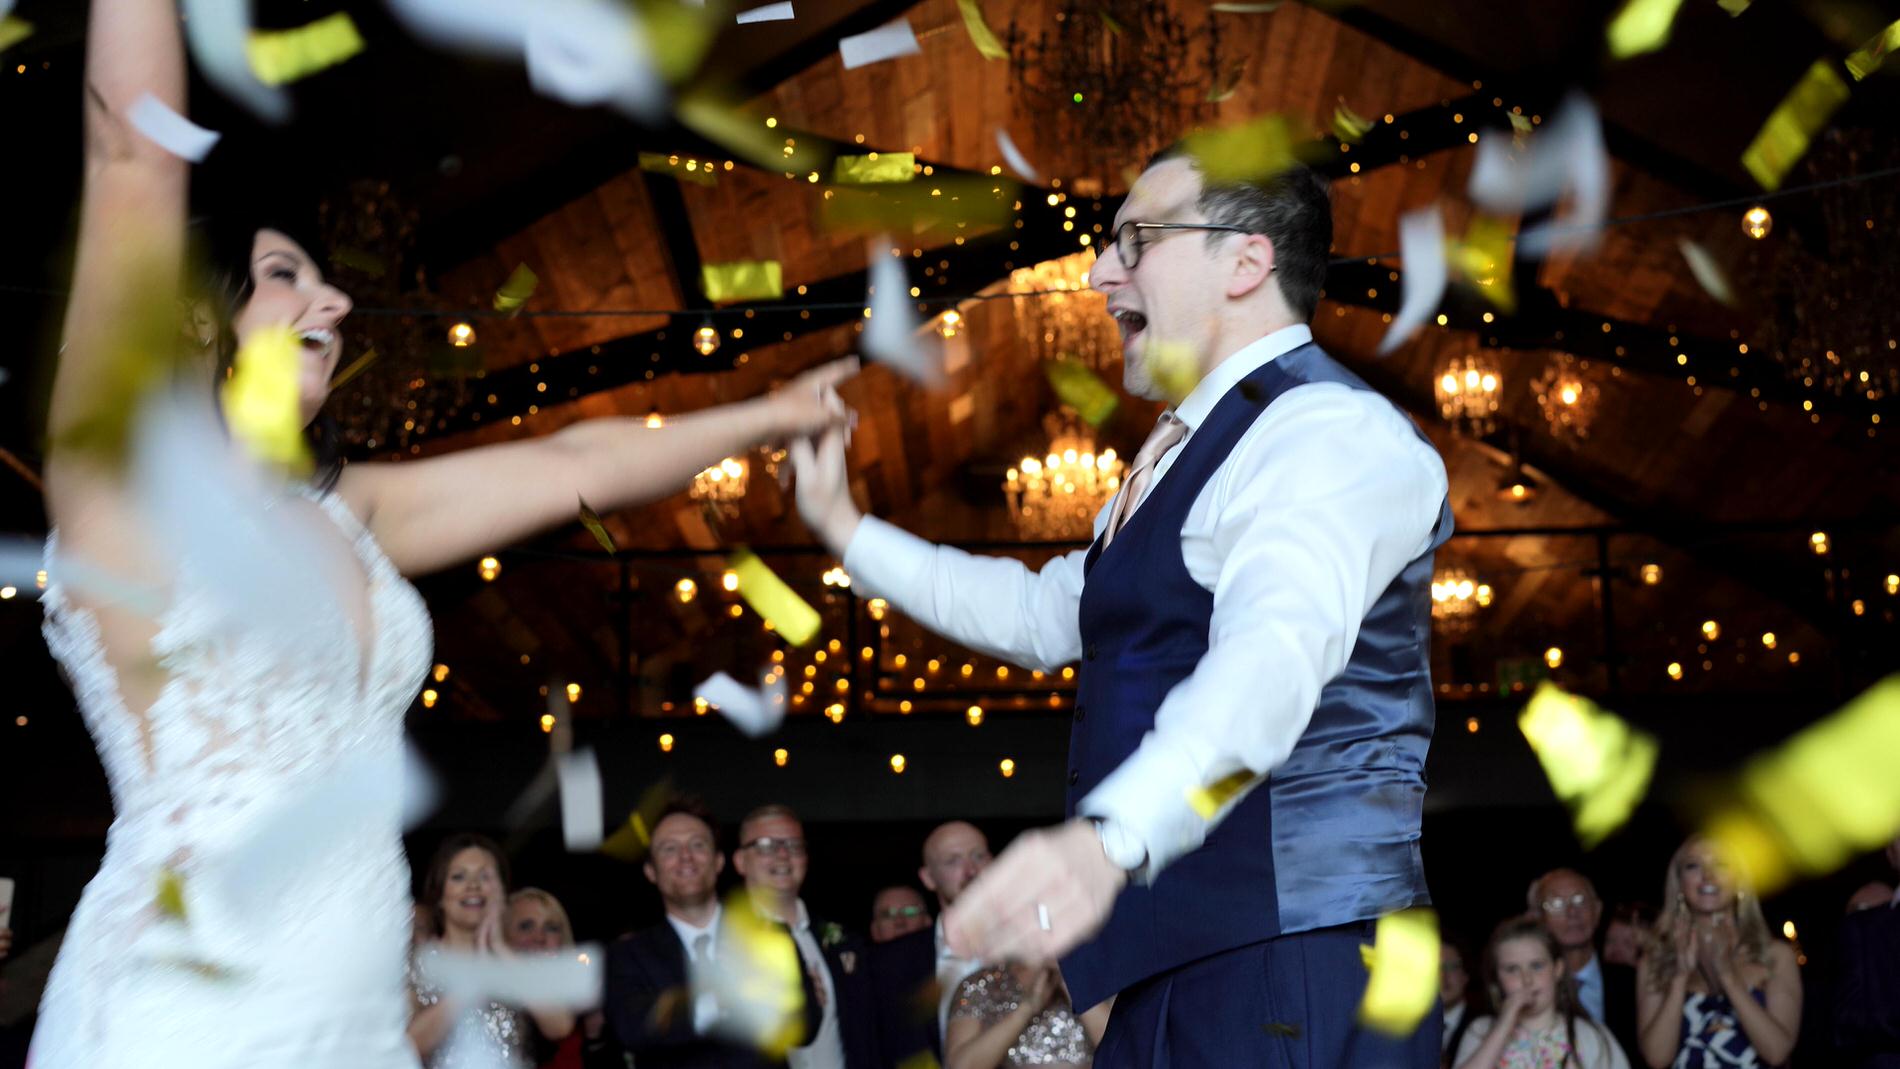 the couple dance with their arms in the air as confetti falls